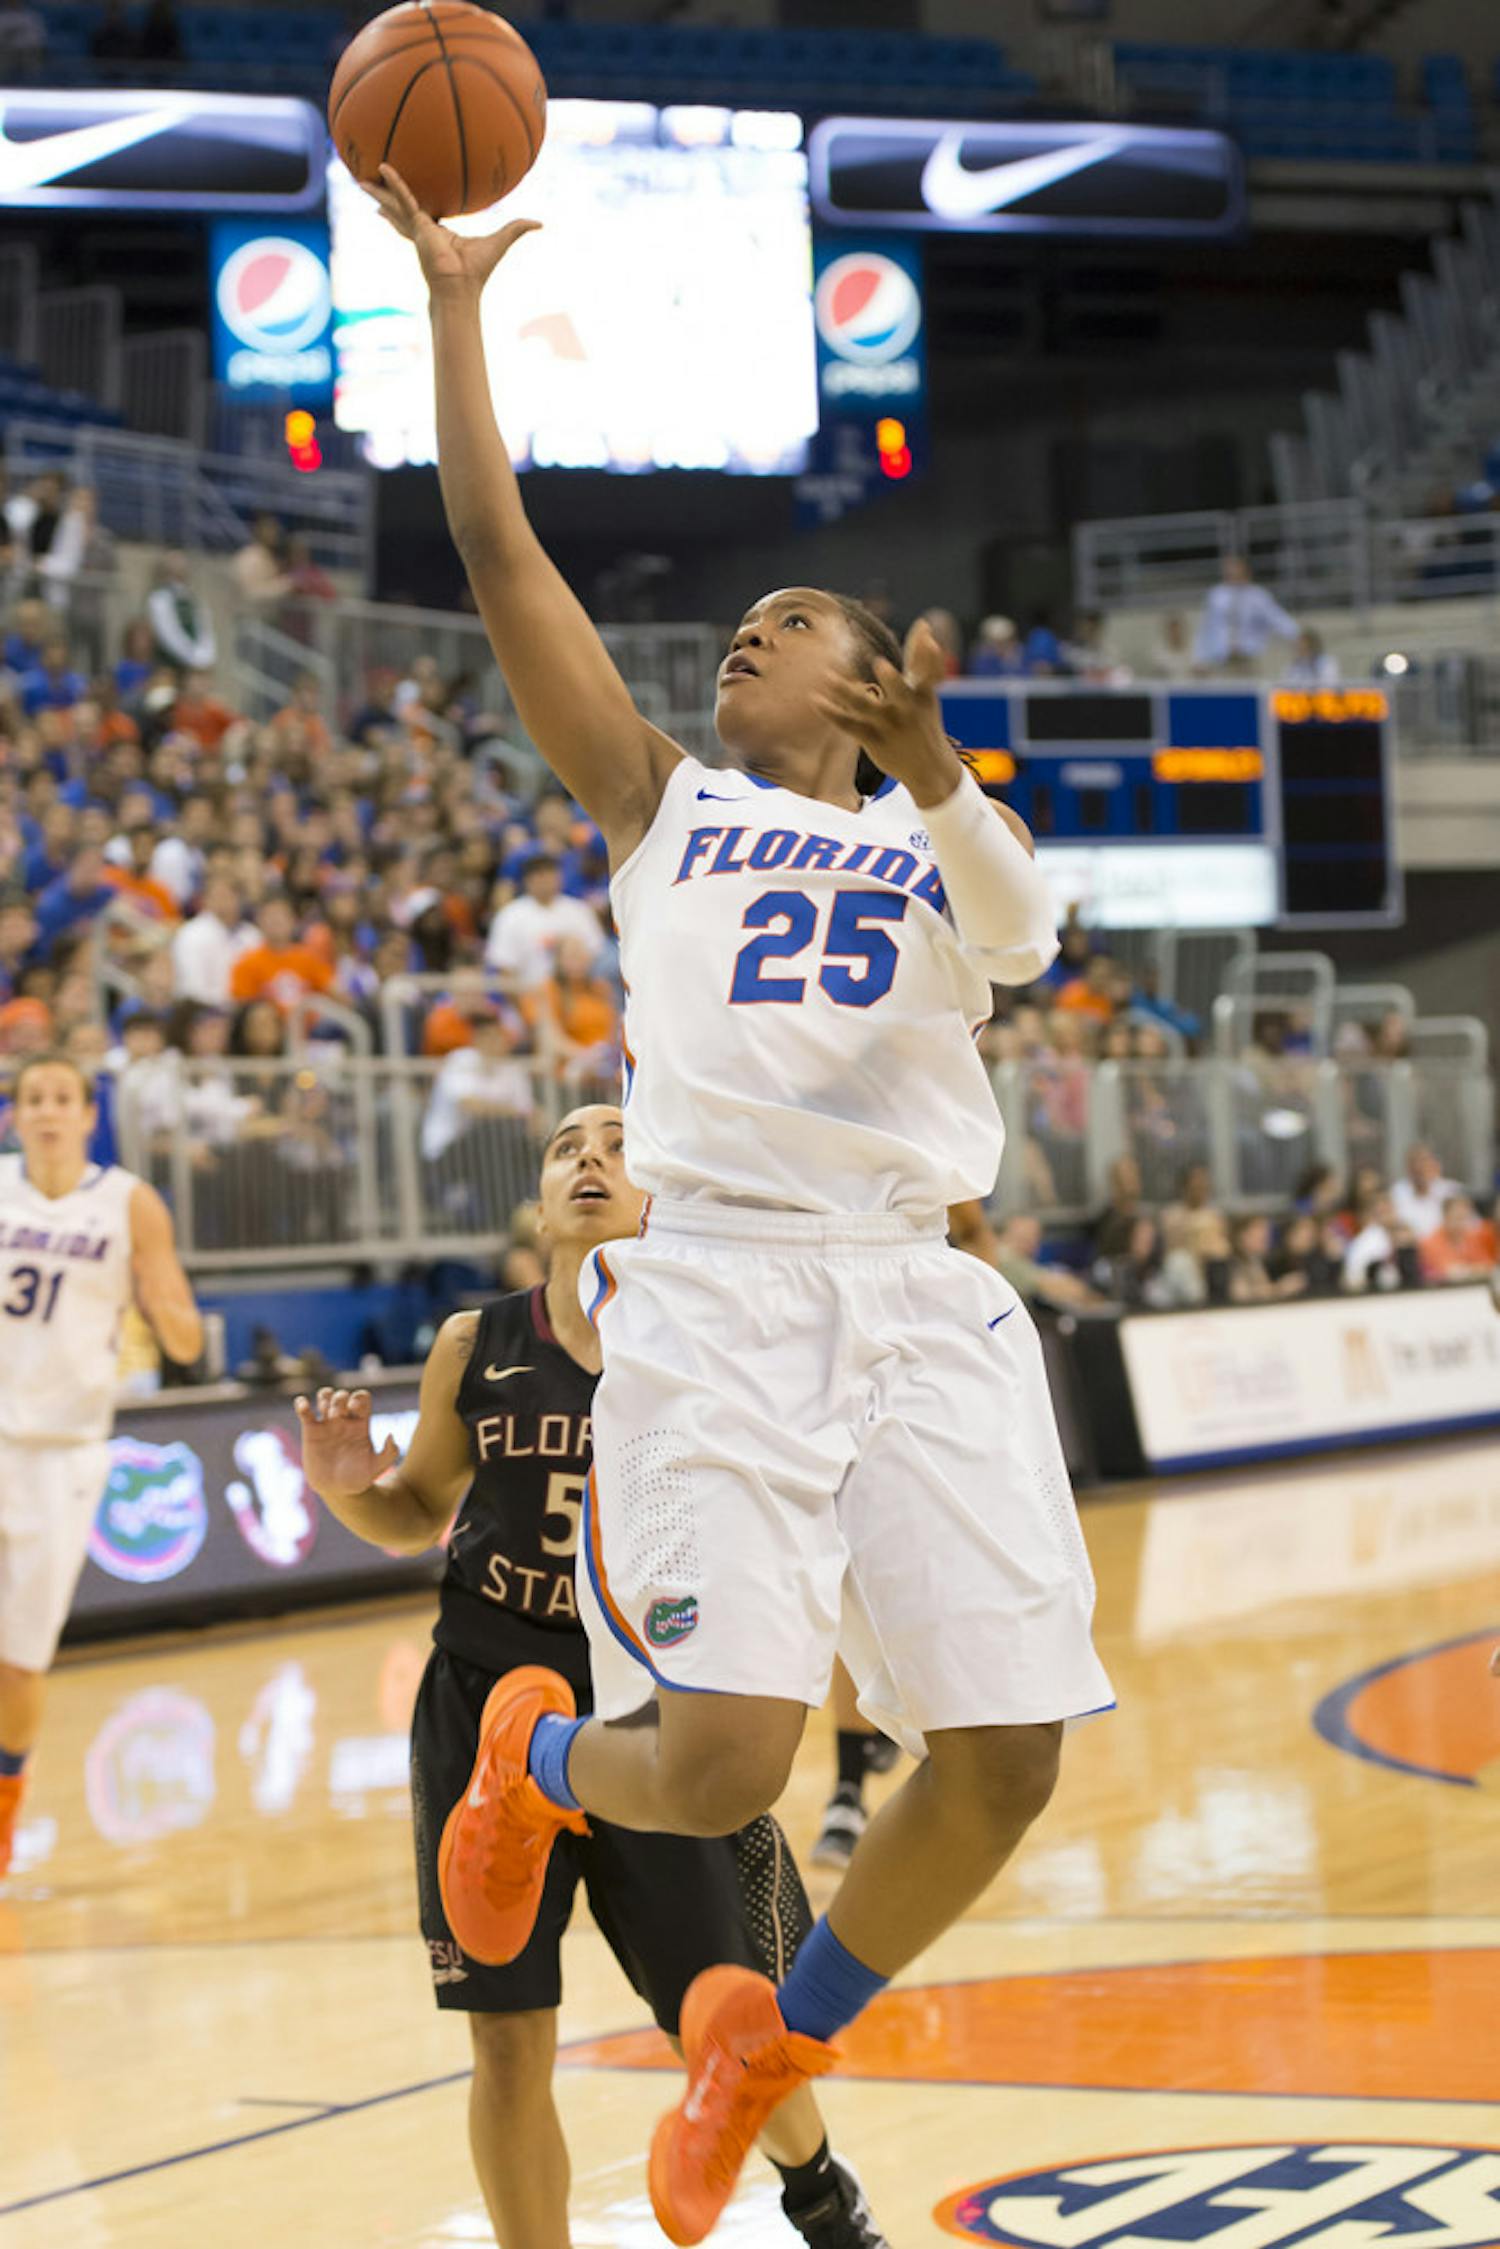 Sophomore forward Christin Mercer attempts a layup during the Gators' 76-68 loss to the Seminoles on Thursday night in the O’Connell Center.